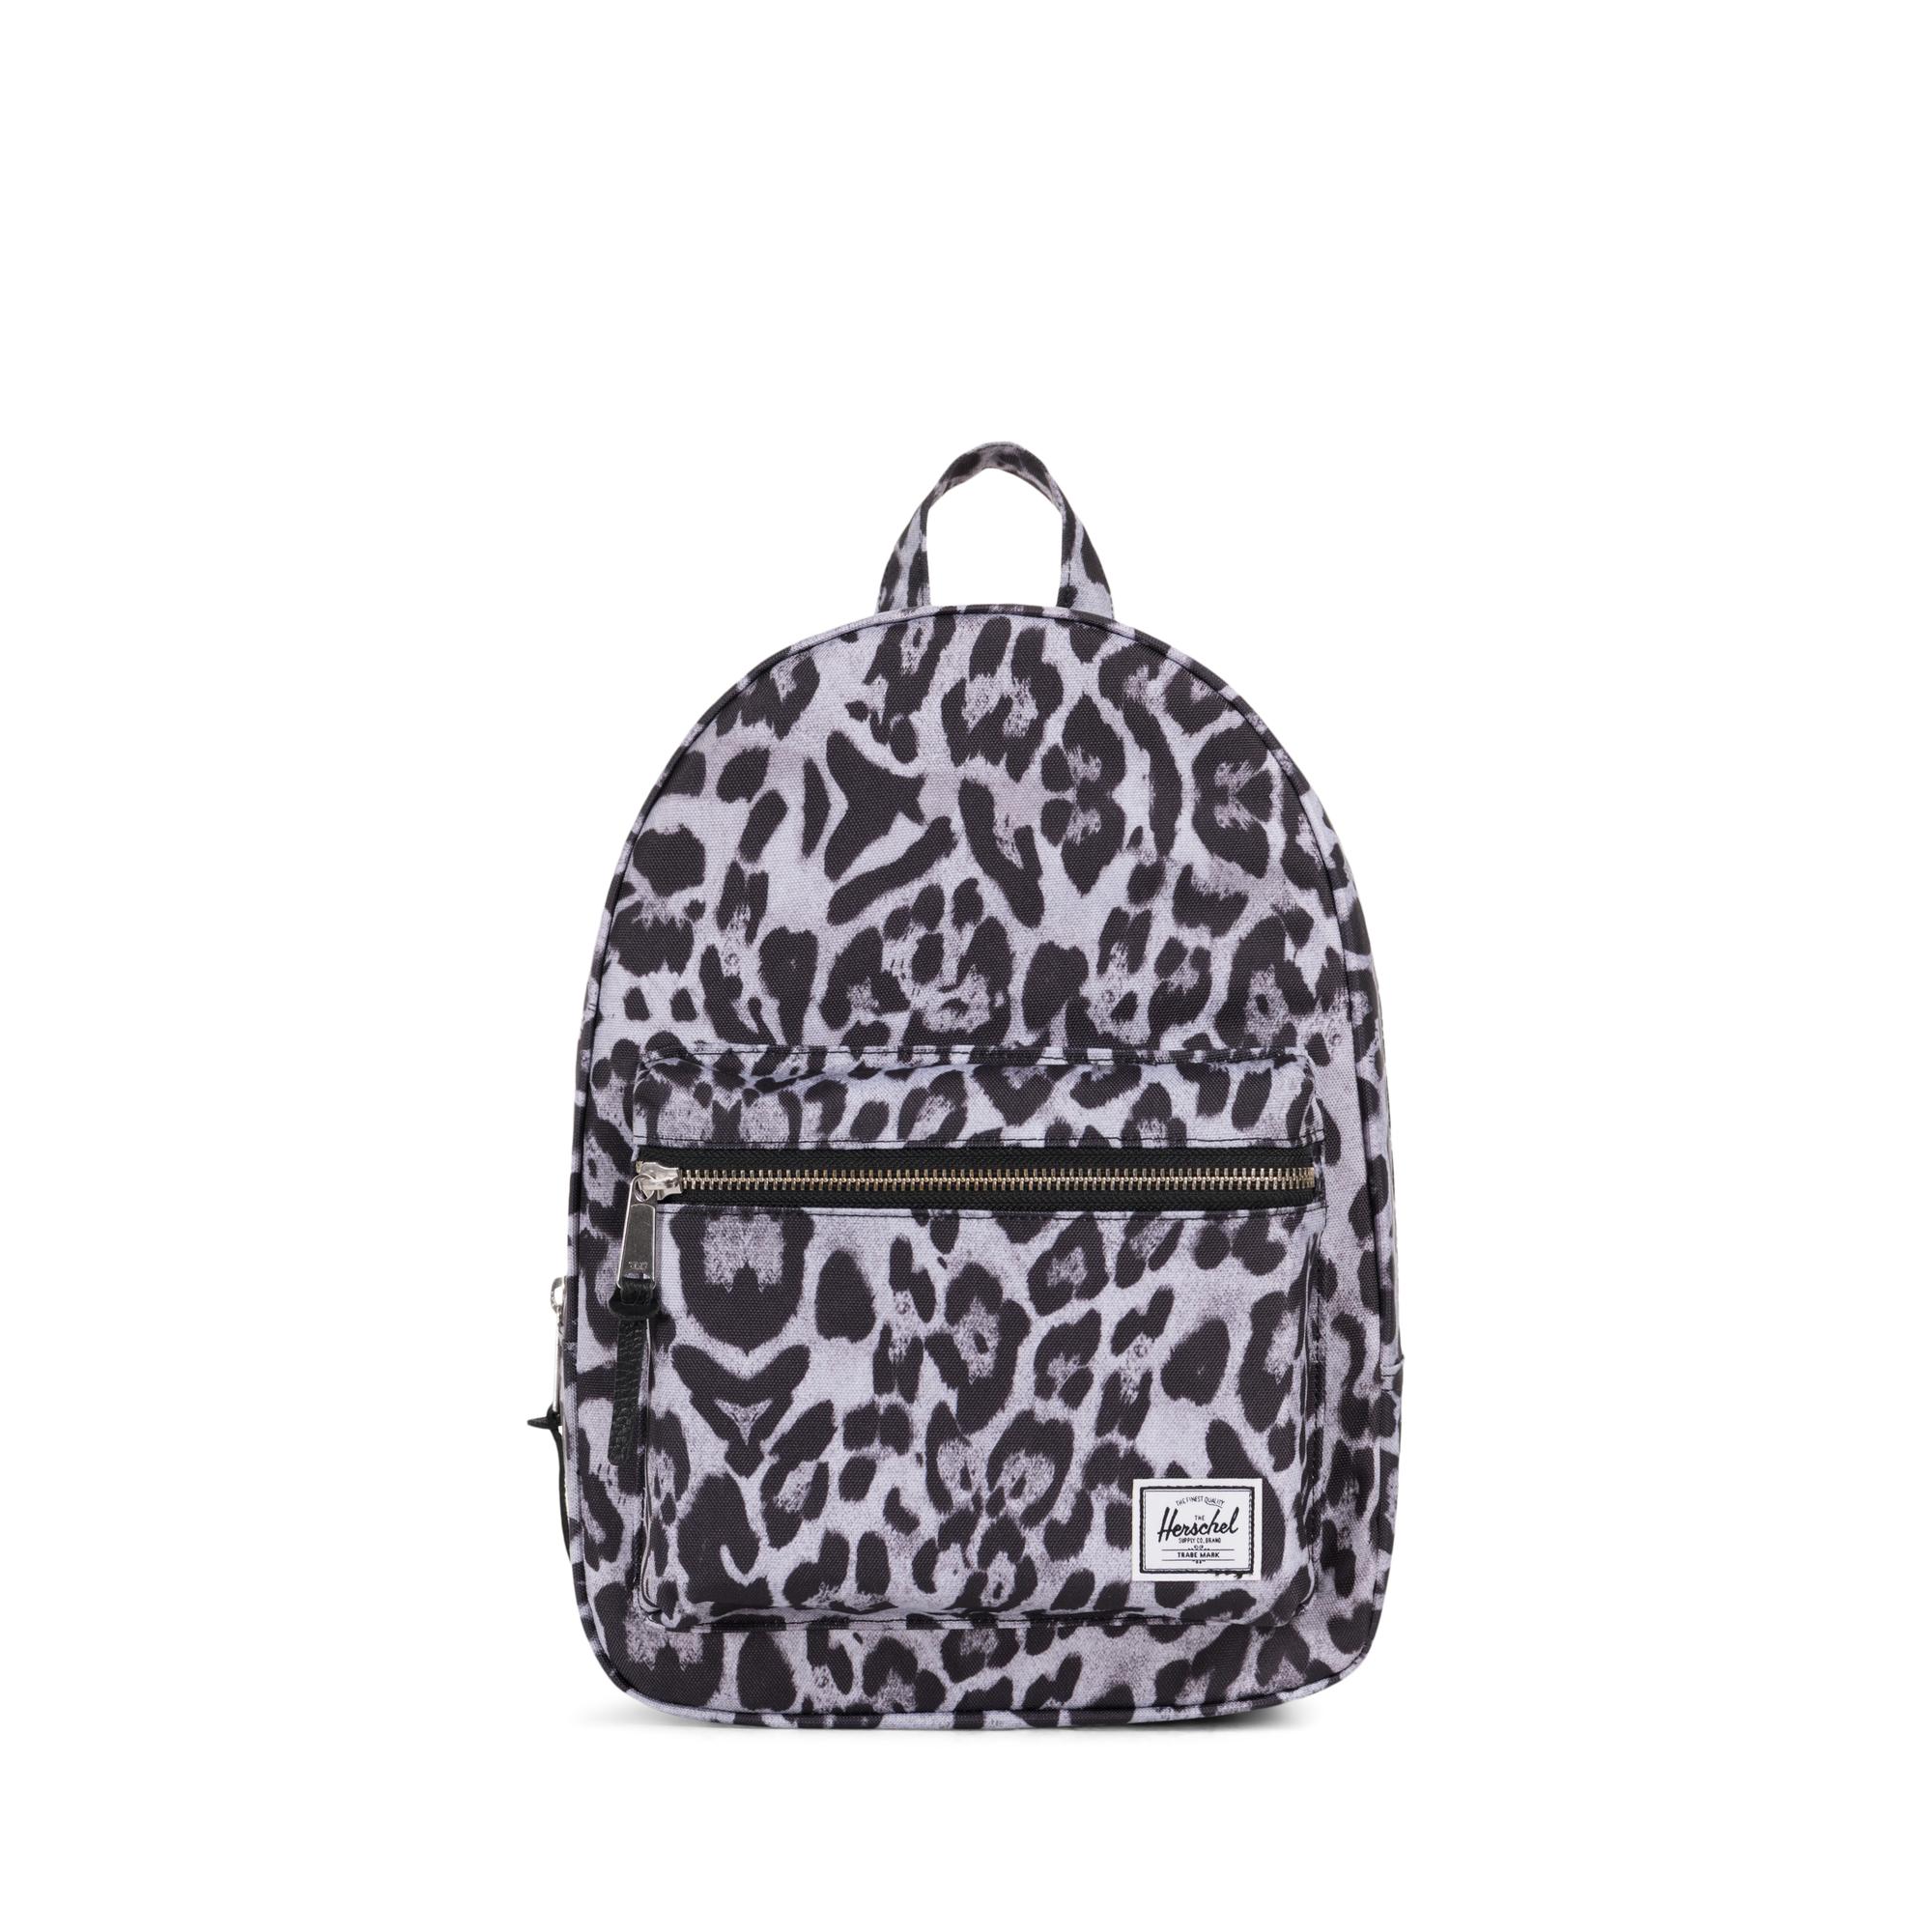 Grove Backpack Small | Herschel Supply Company